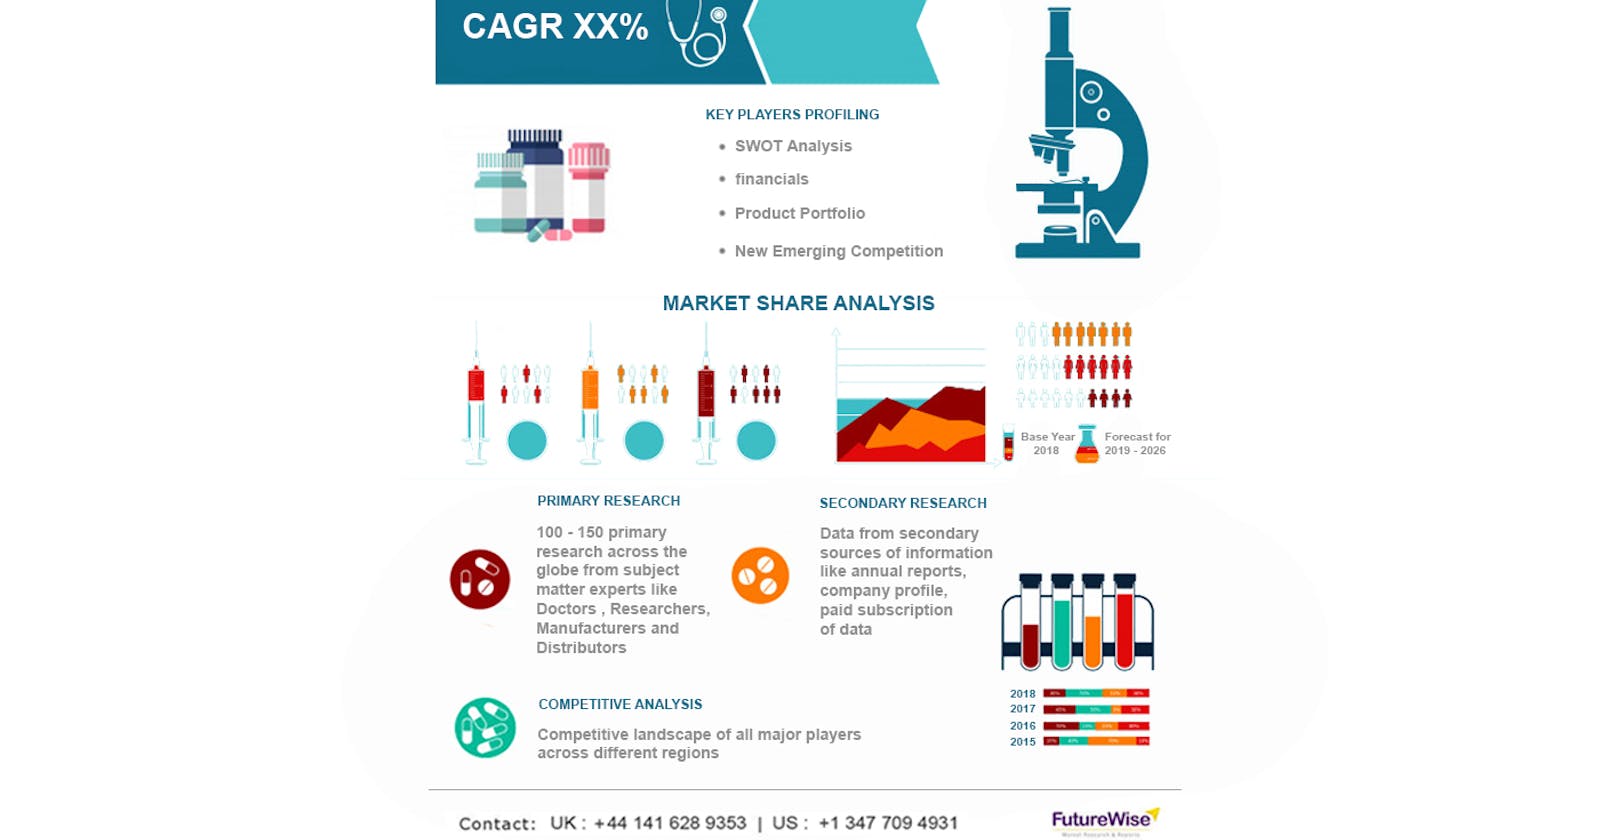 Digital Dentistry Market Share, Overview, Competitive Analysis and Forecast 2031